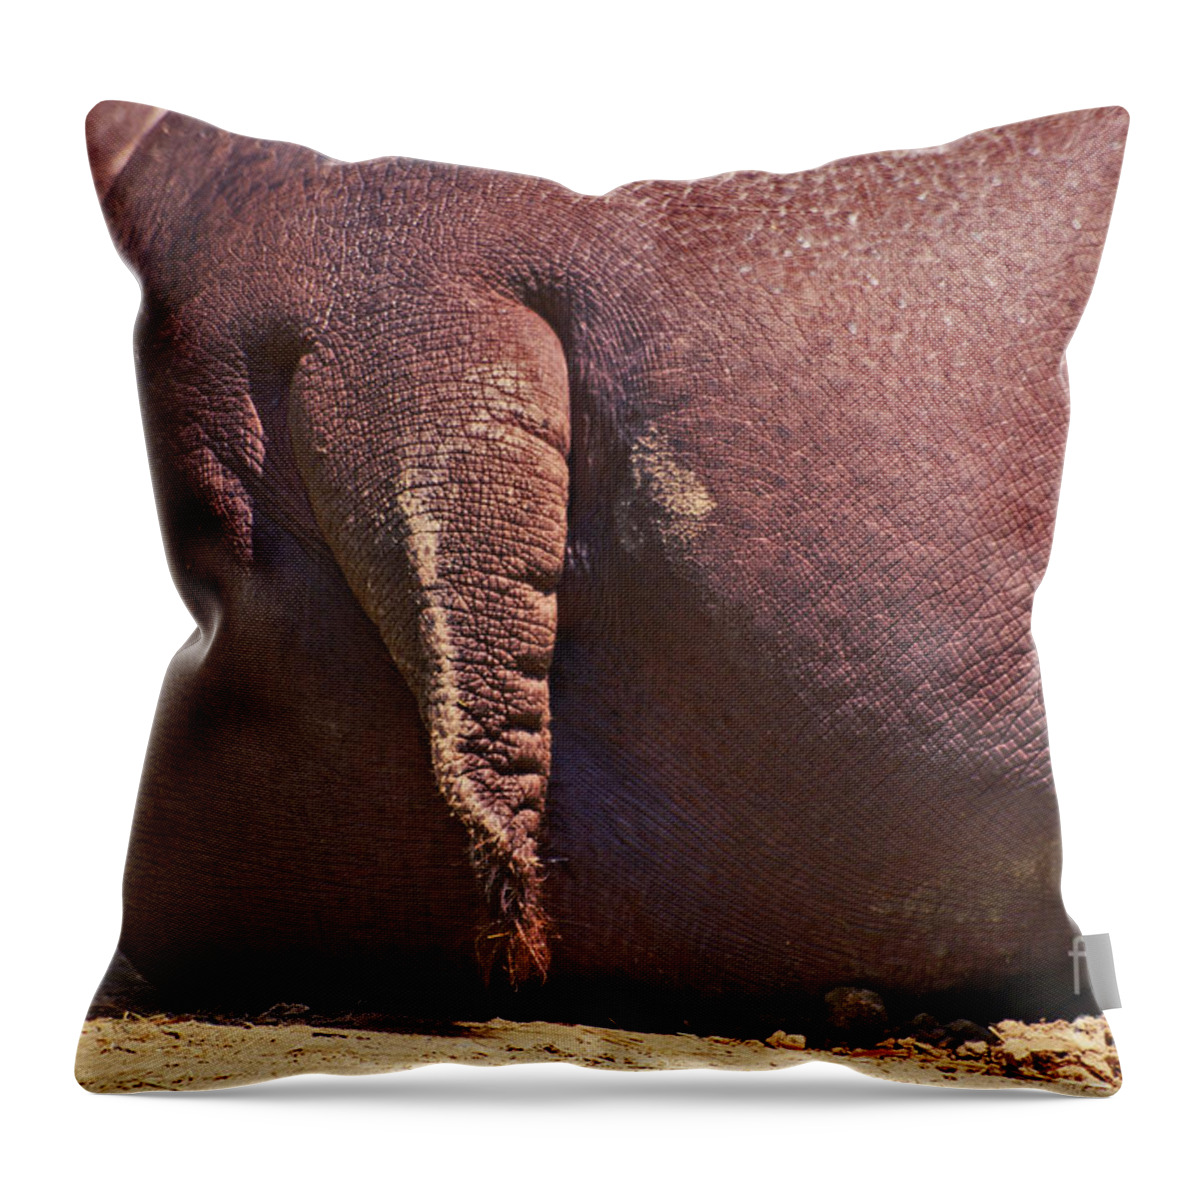 Rhinoceros Throw Pillow featuring the photograph Arriere-Train by Aimelle Ml